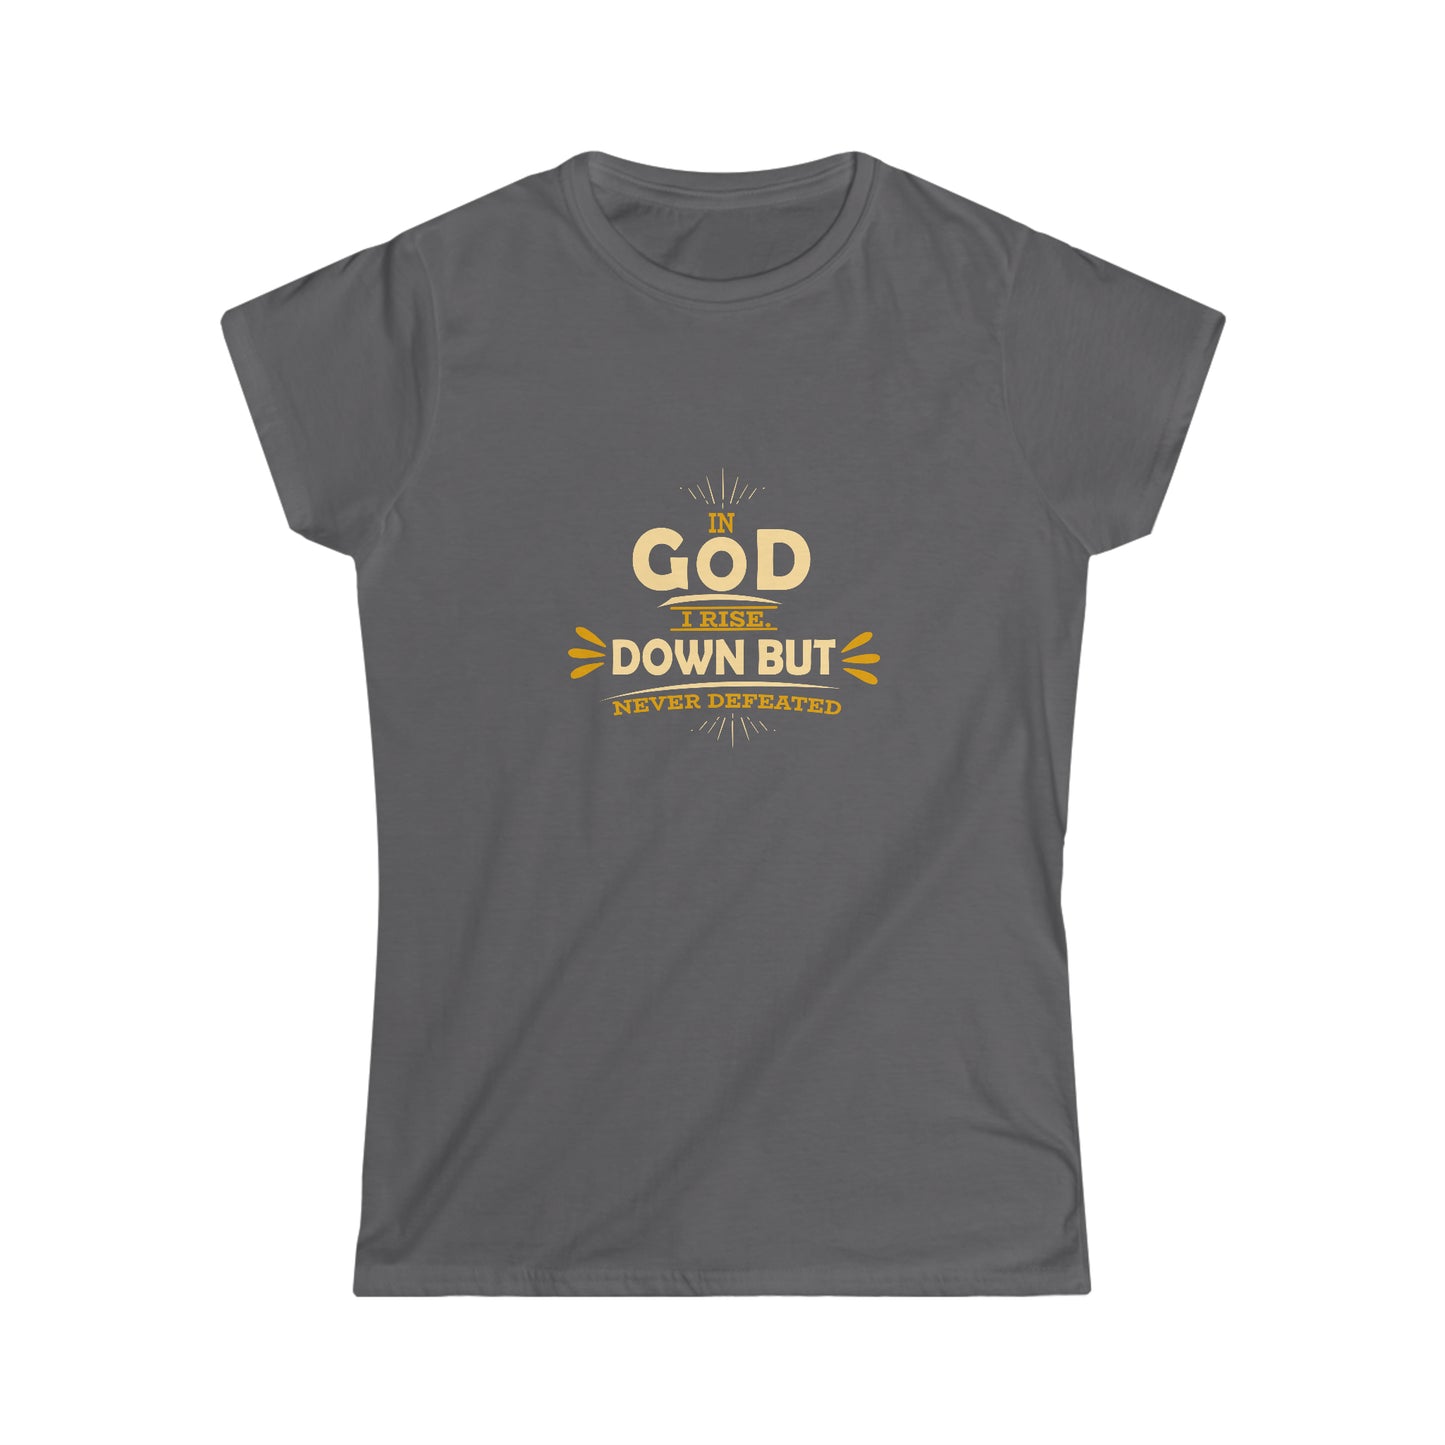 In God I Rise Down But Never Defeated Women's T-shirt